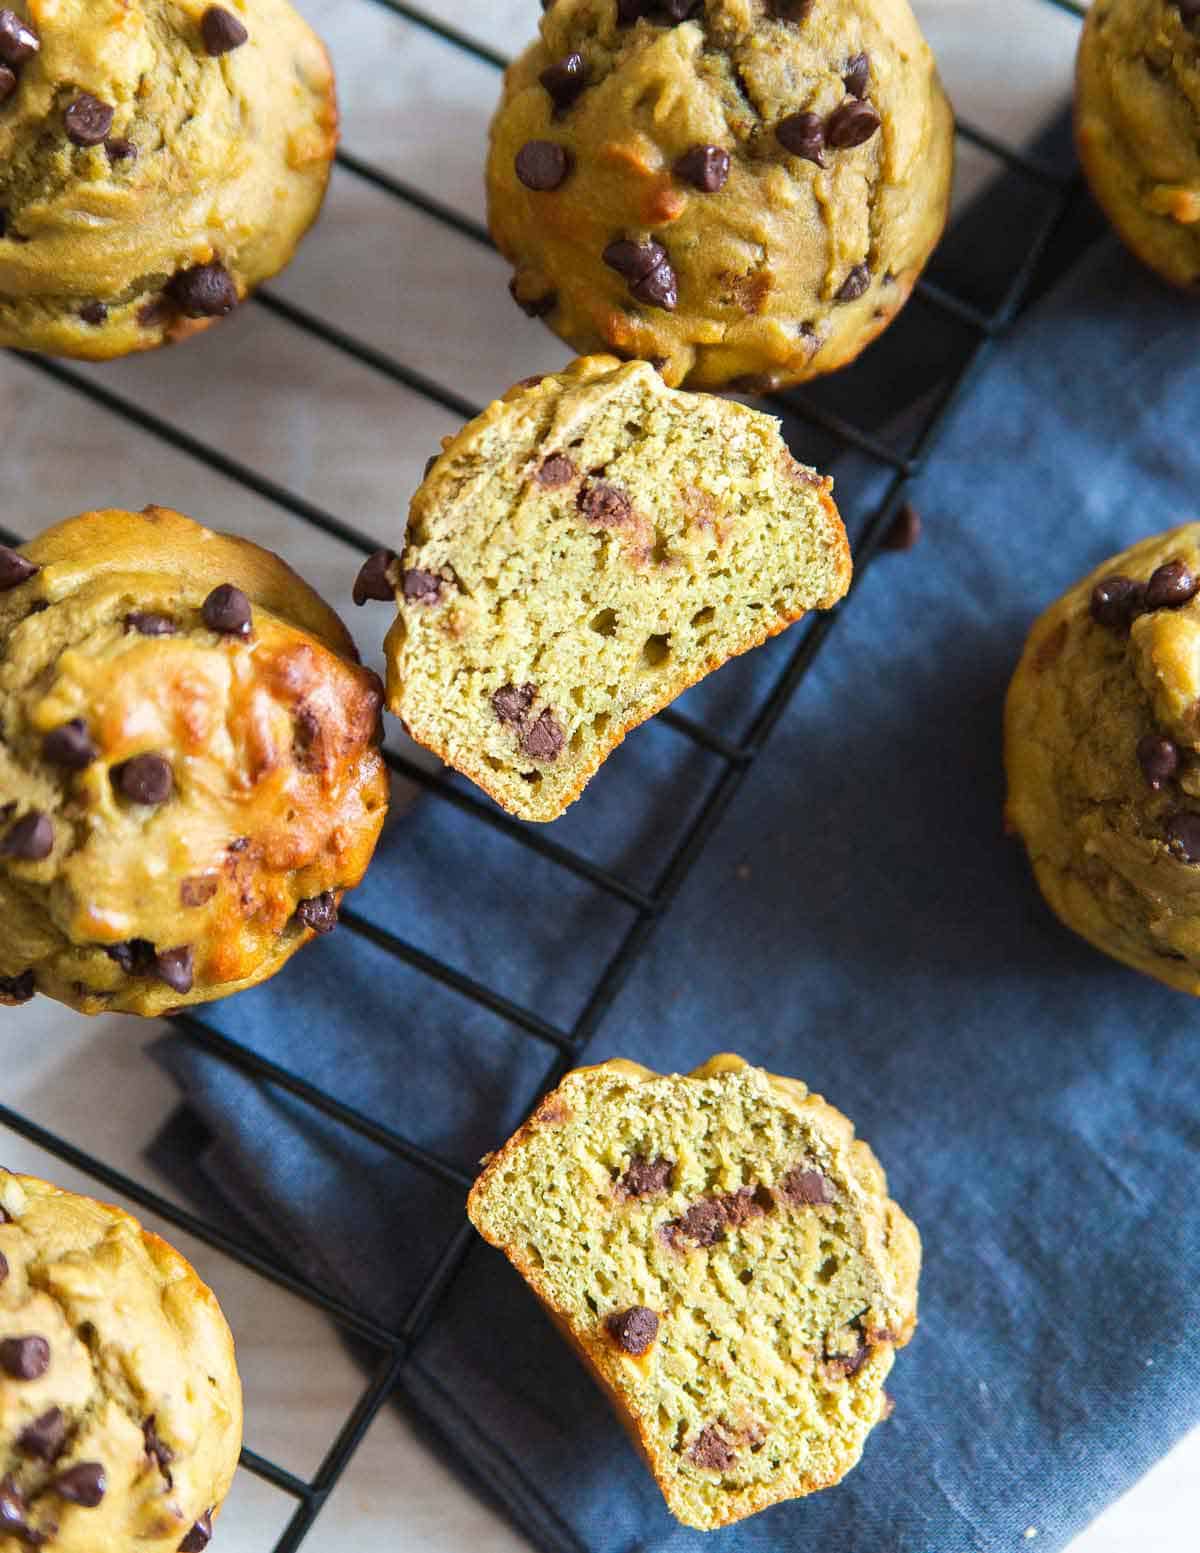 These avocado muffins are studded with mini chocolate chips for a fun and healthy snack.